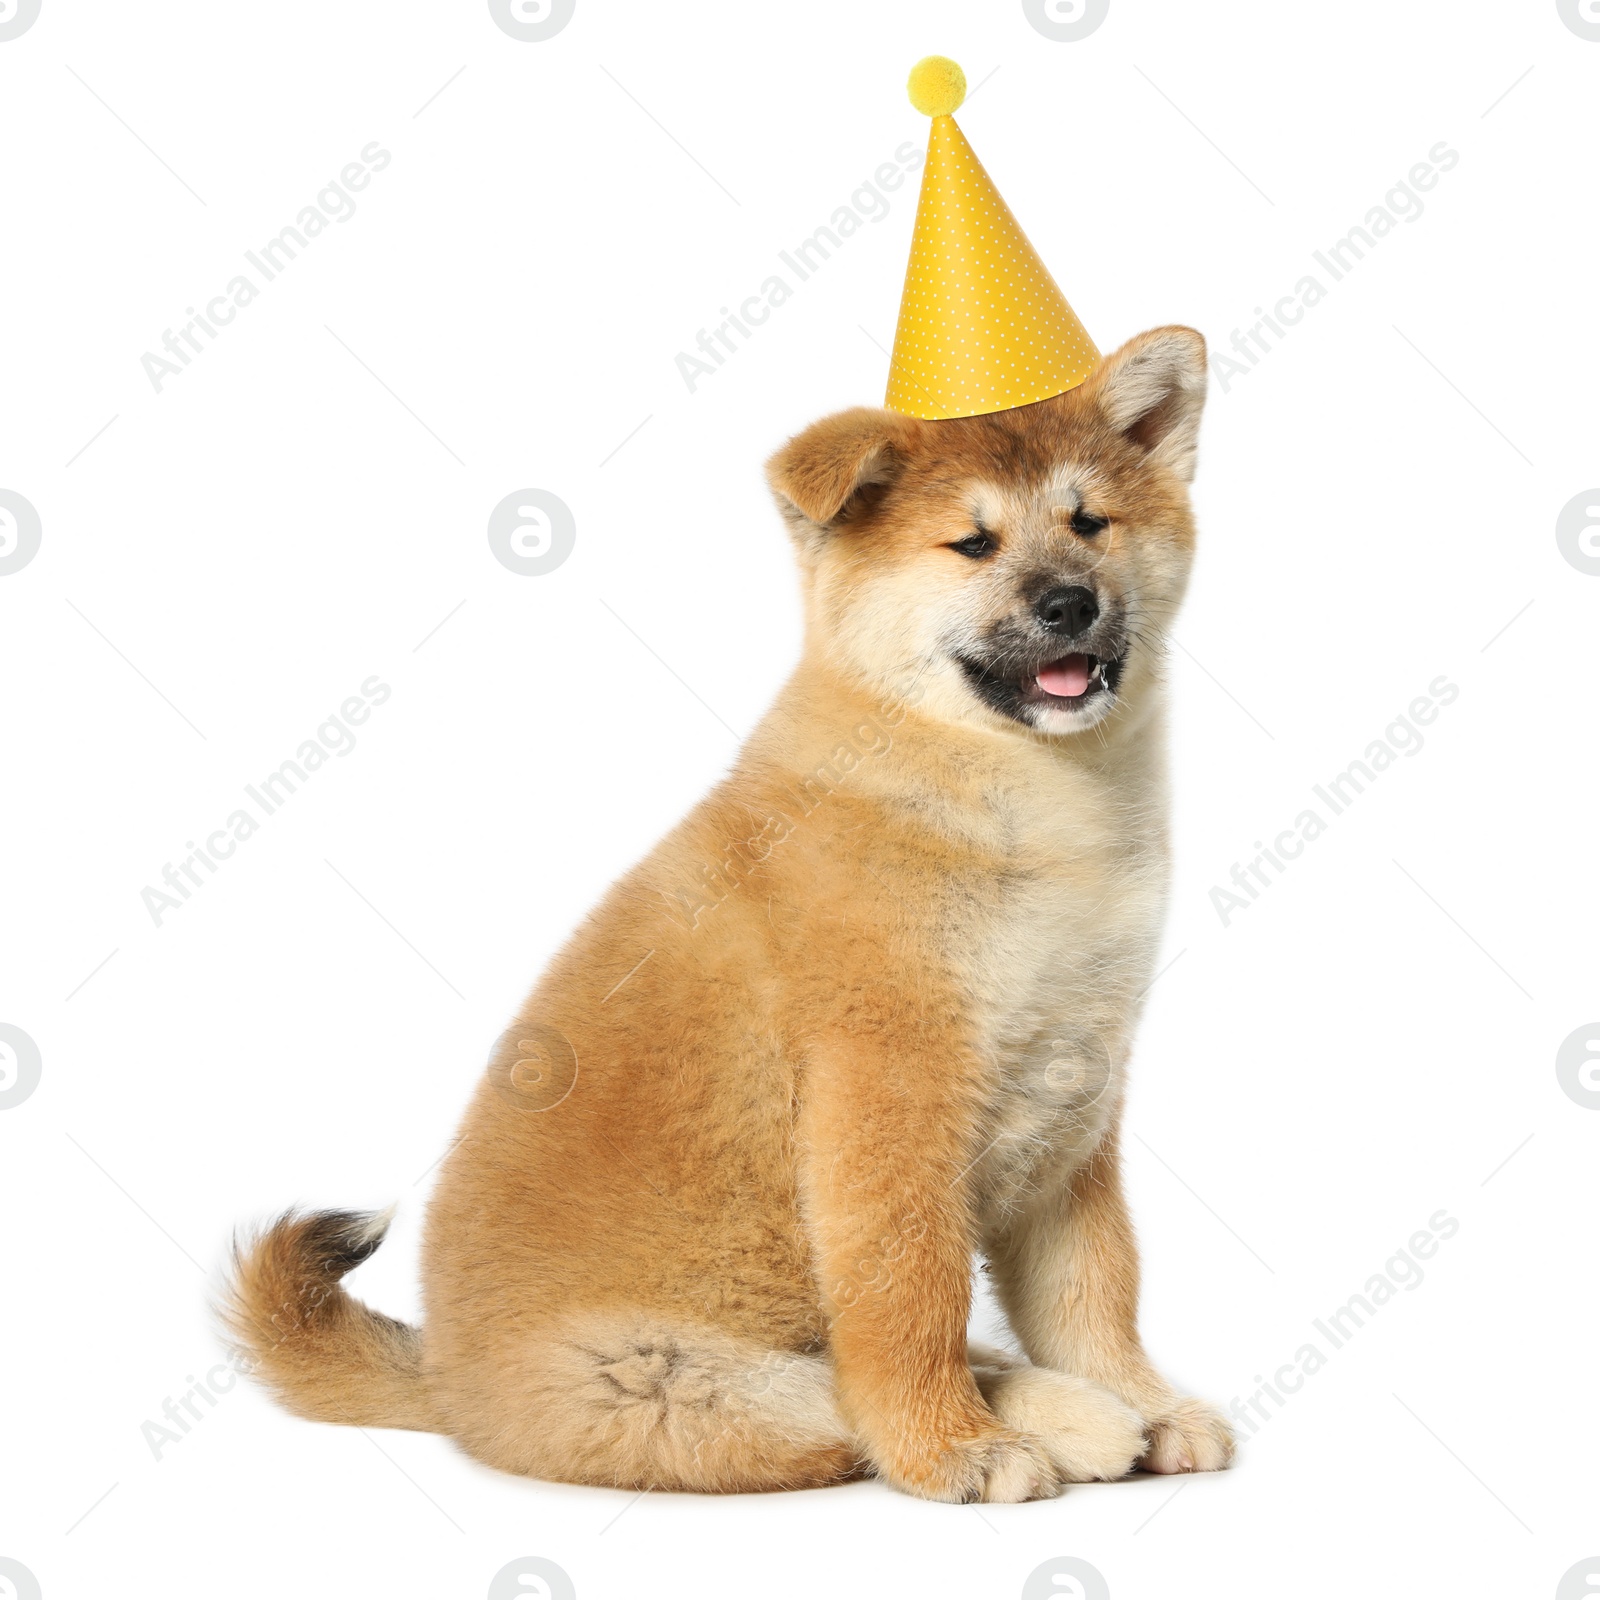 Image of Cute Akita Inu puppy with party hat on white background